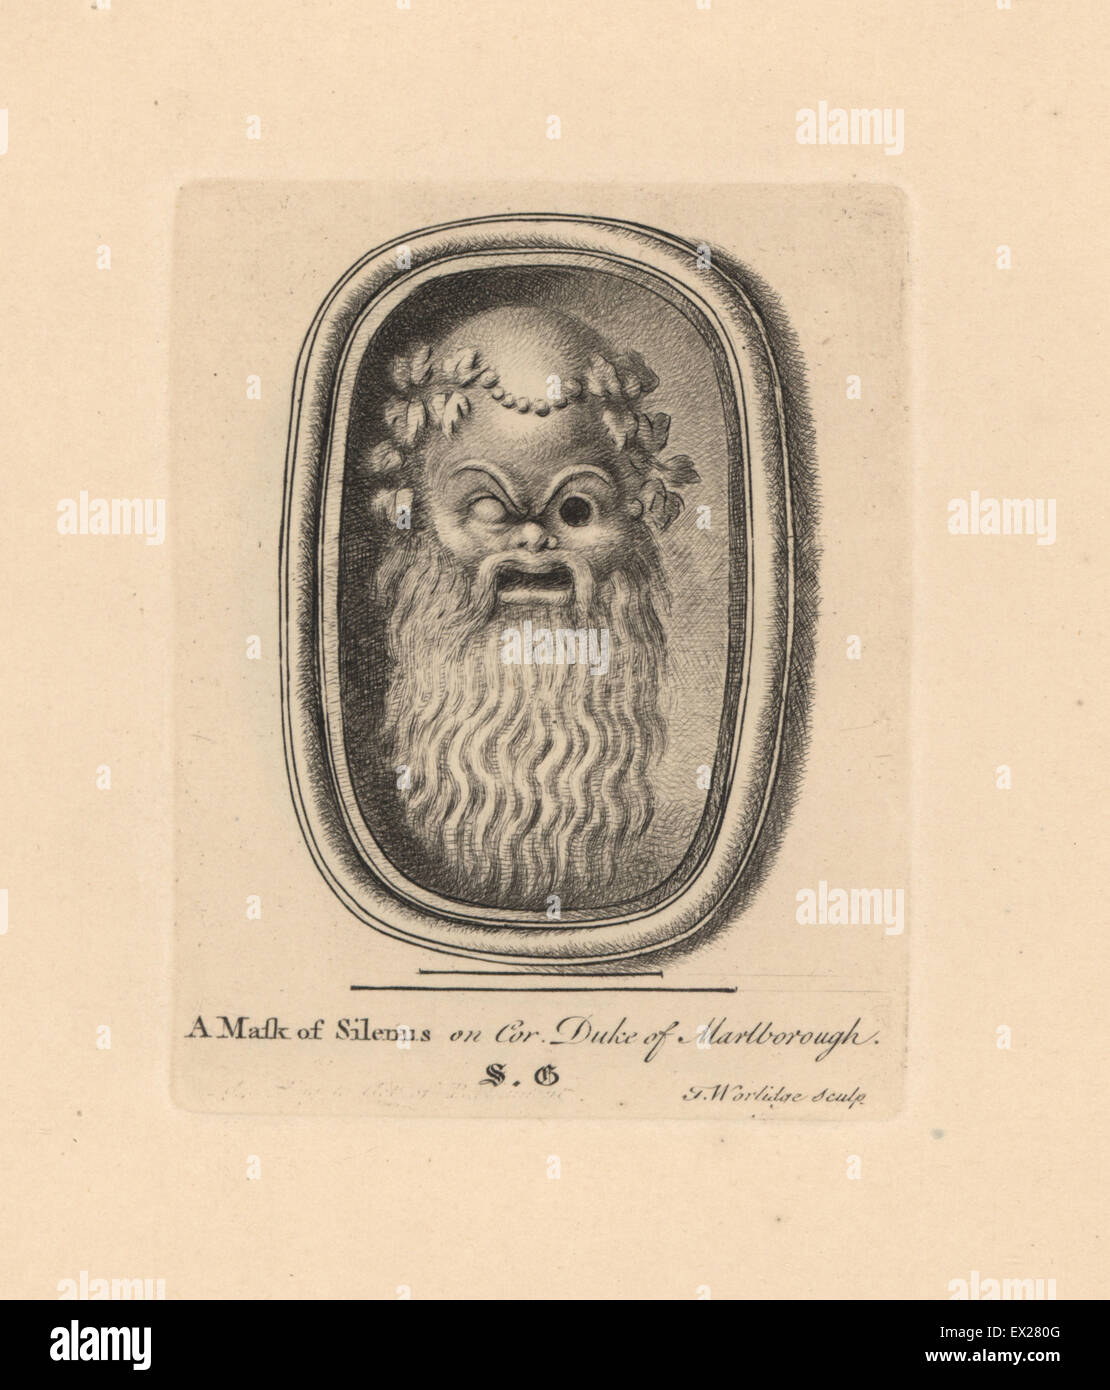 Mask of the satyr Silenus, companion to Dionysus, Greek god of wine, on  cornelian from the Duke of Marlborough's collection. Copperplate engraving  by Thomas Worlidge from James Vallentin's One Hundred and Eight